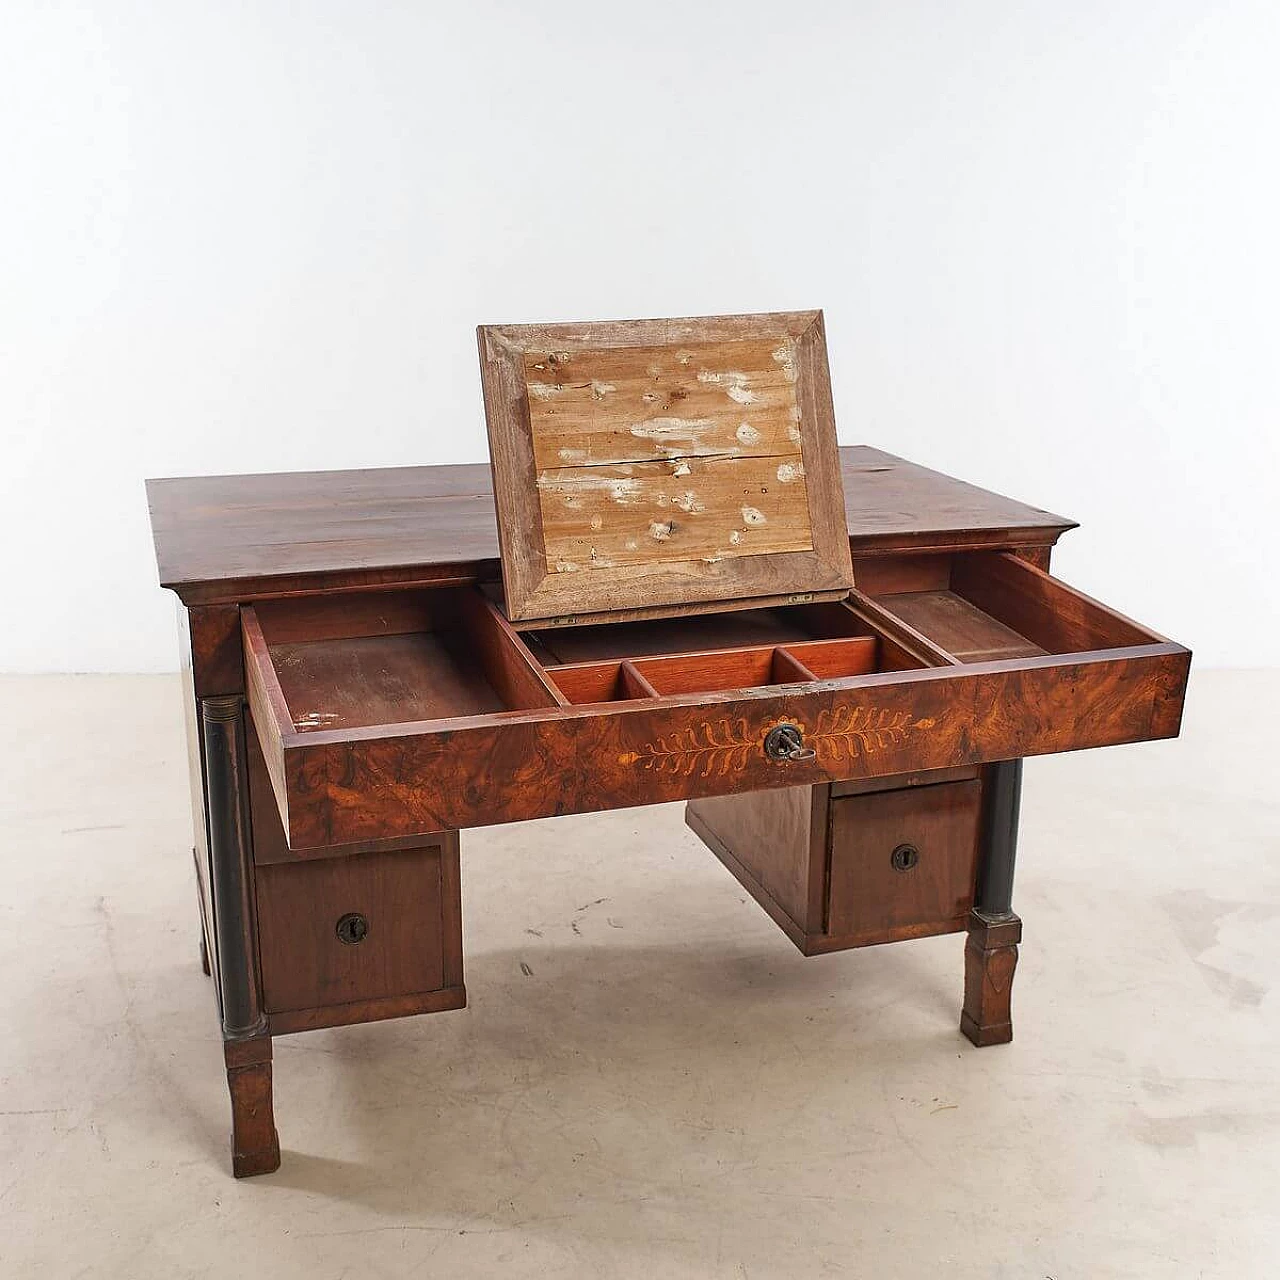 Empire-style panelled and inlaid wooden center desk, 19th century 5